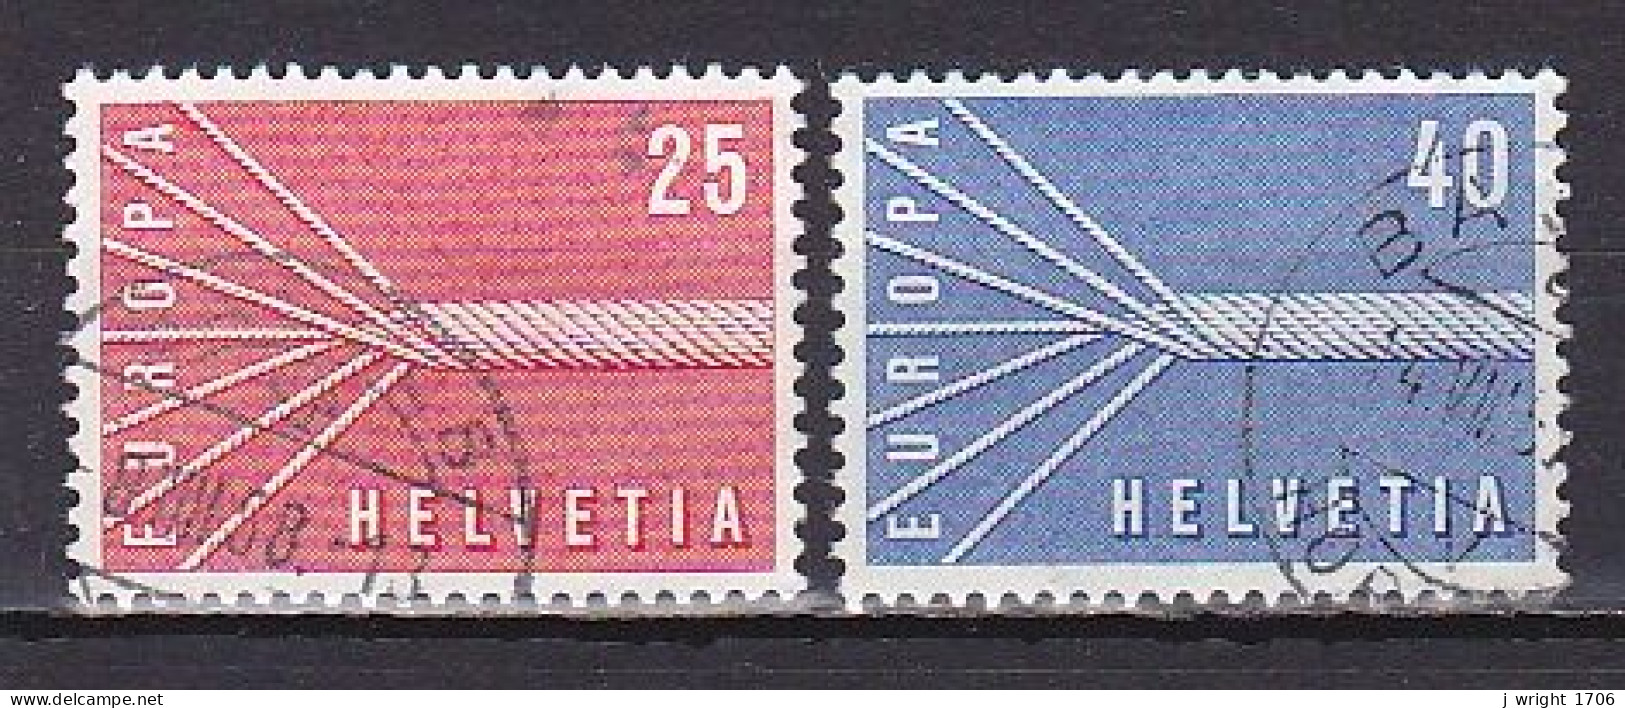 Switzerland, 1957, Europa CEPT, Set, USED - Used Stamps